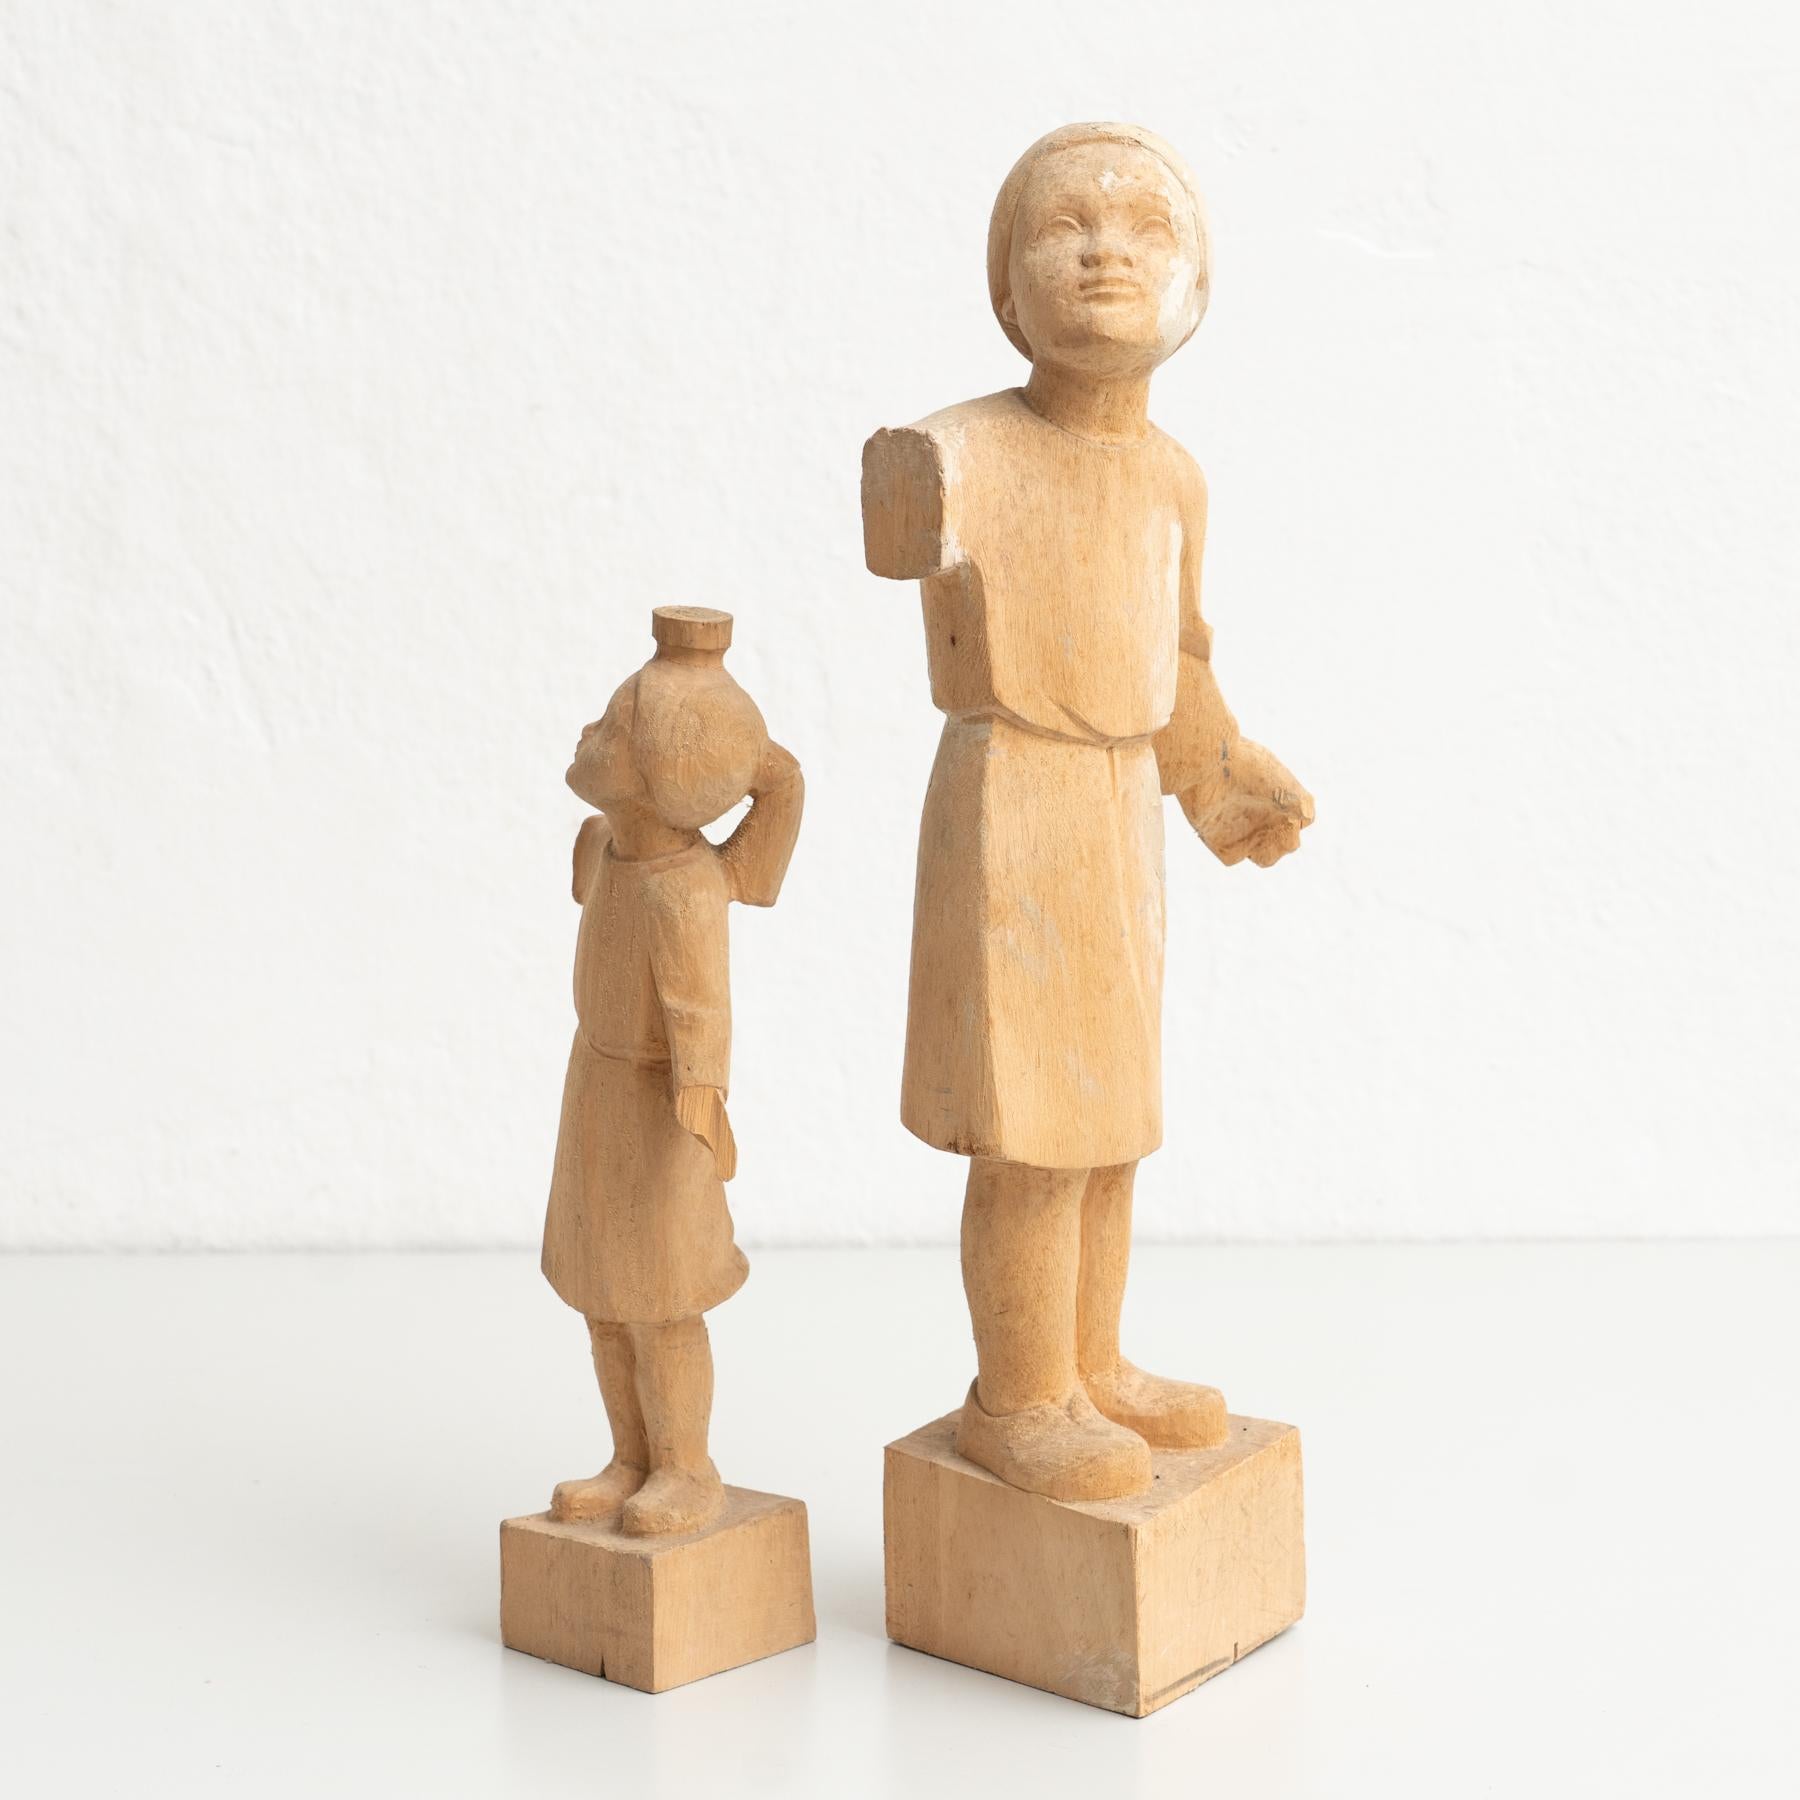 Mid-20th century turned trial figures of two girls made of wood.
Made in Olot, Spain.

In original condition, with minor wear consistent with age and use, preserving a beautiful patina.

Materials:
Wood.